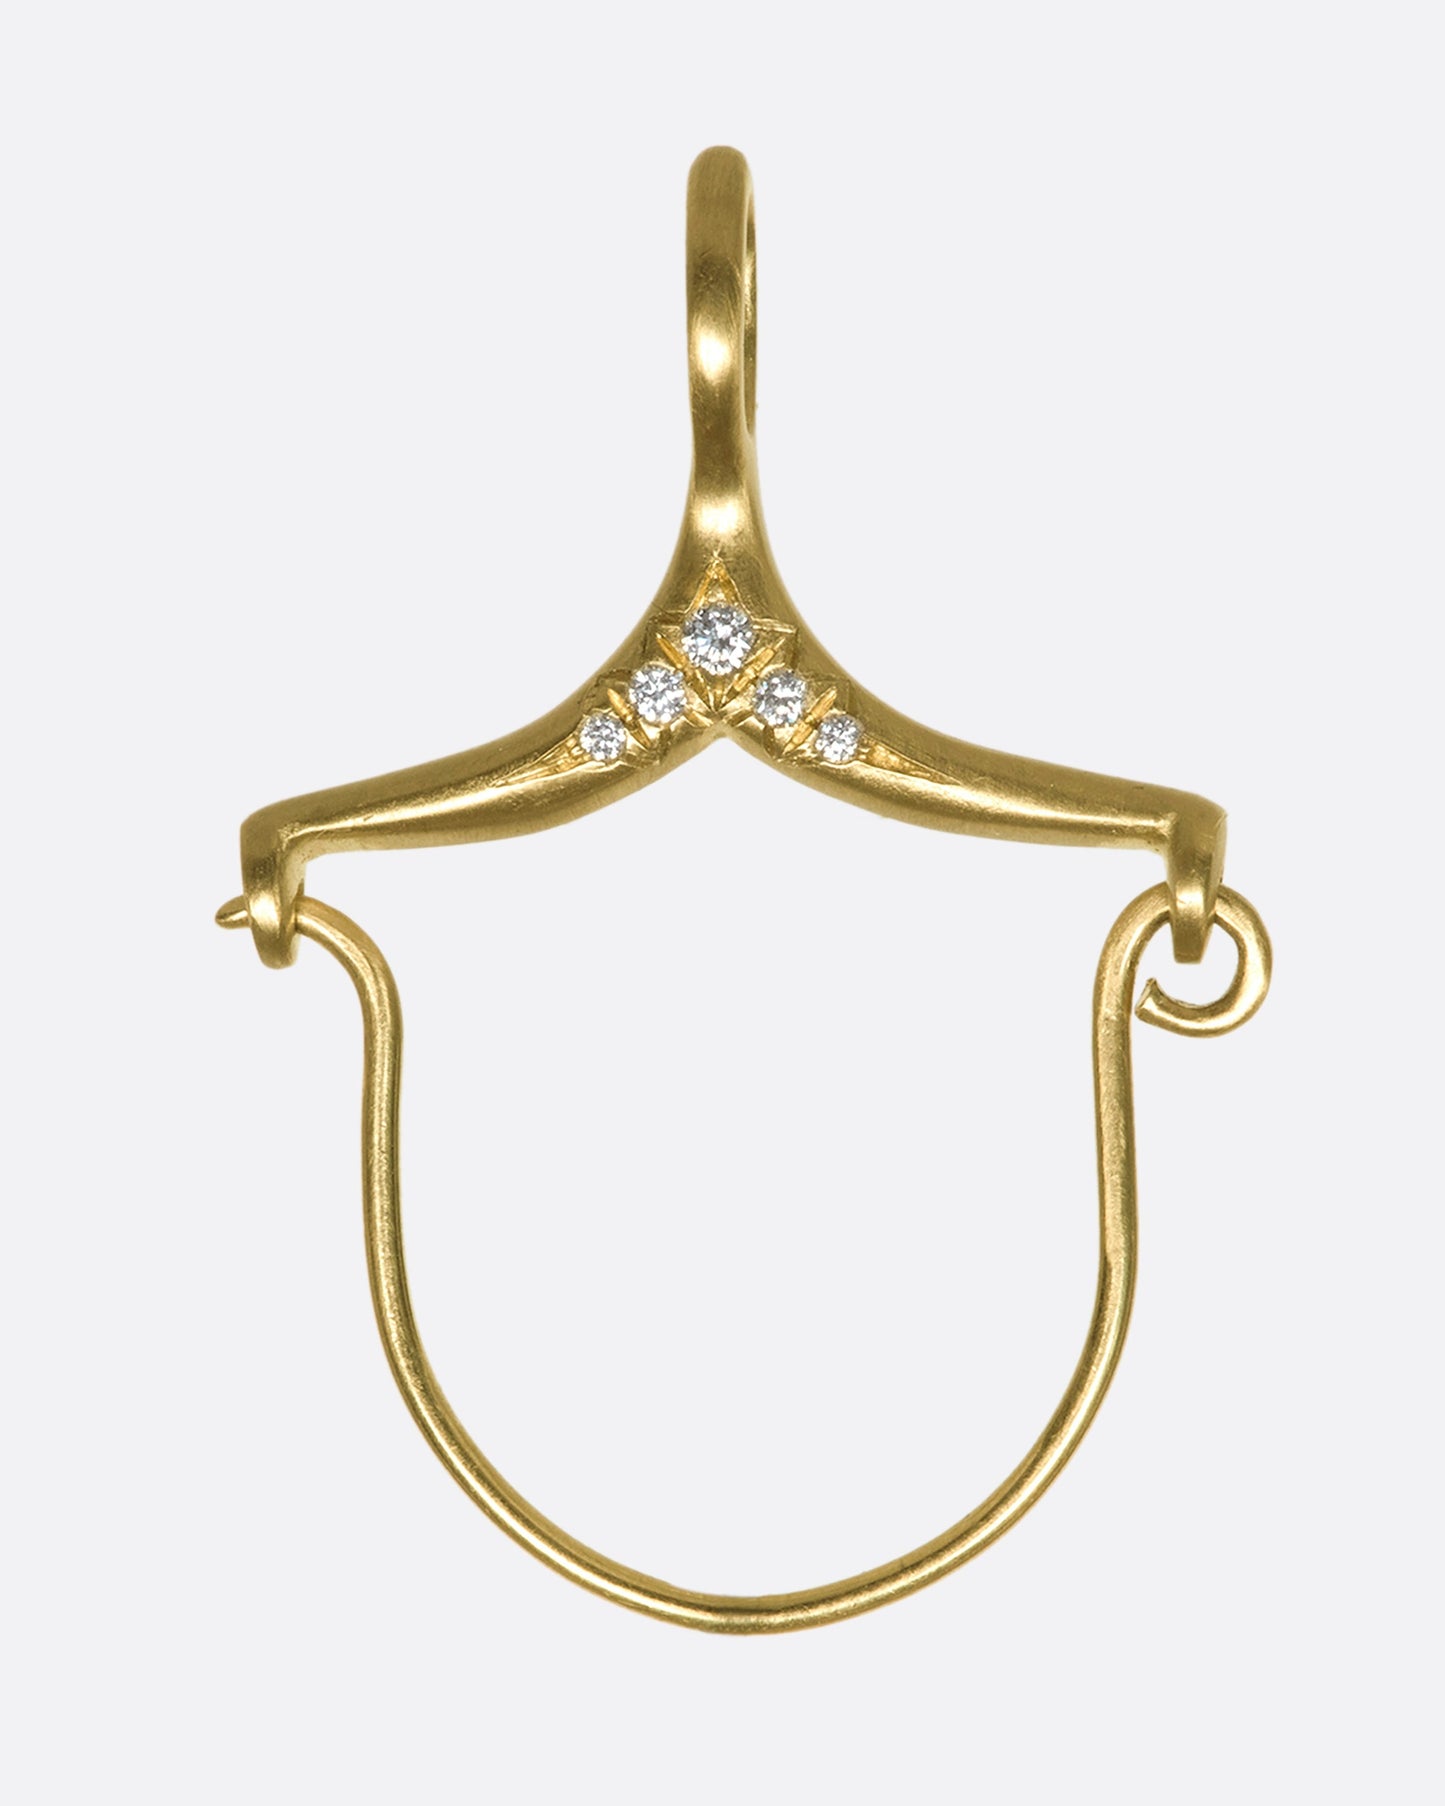 A gold and diamond charm holder close up.